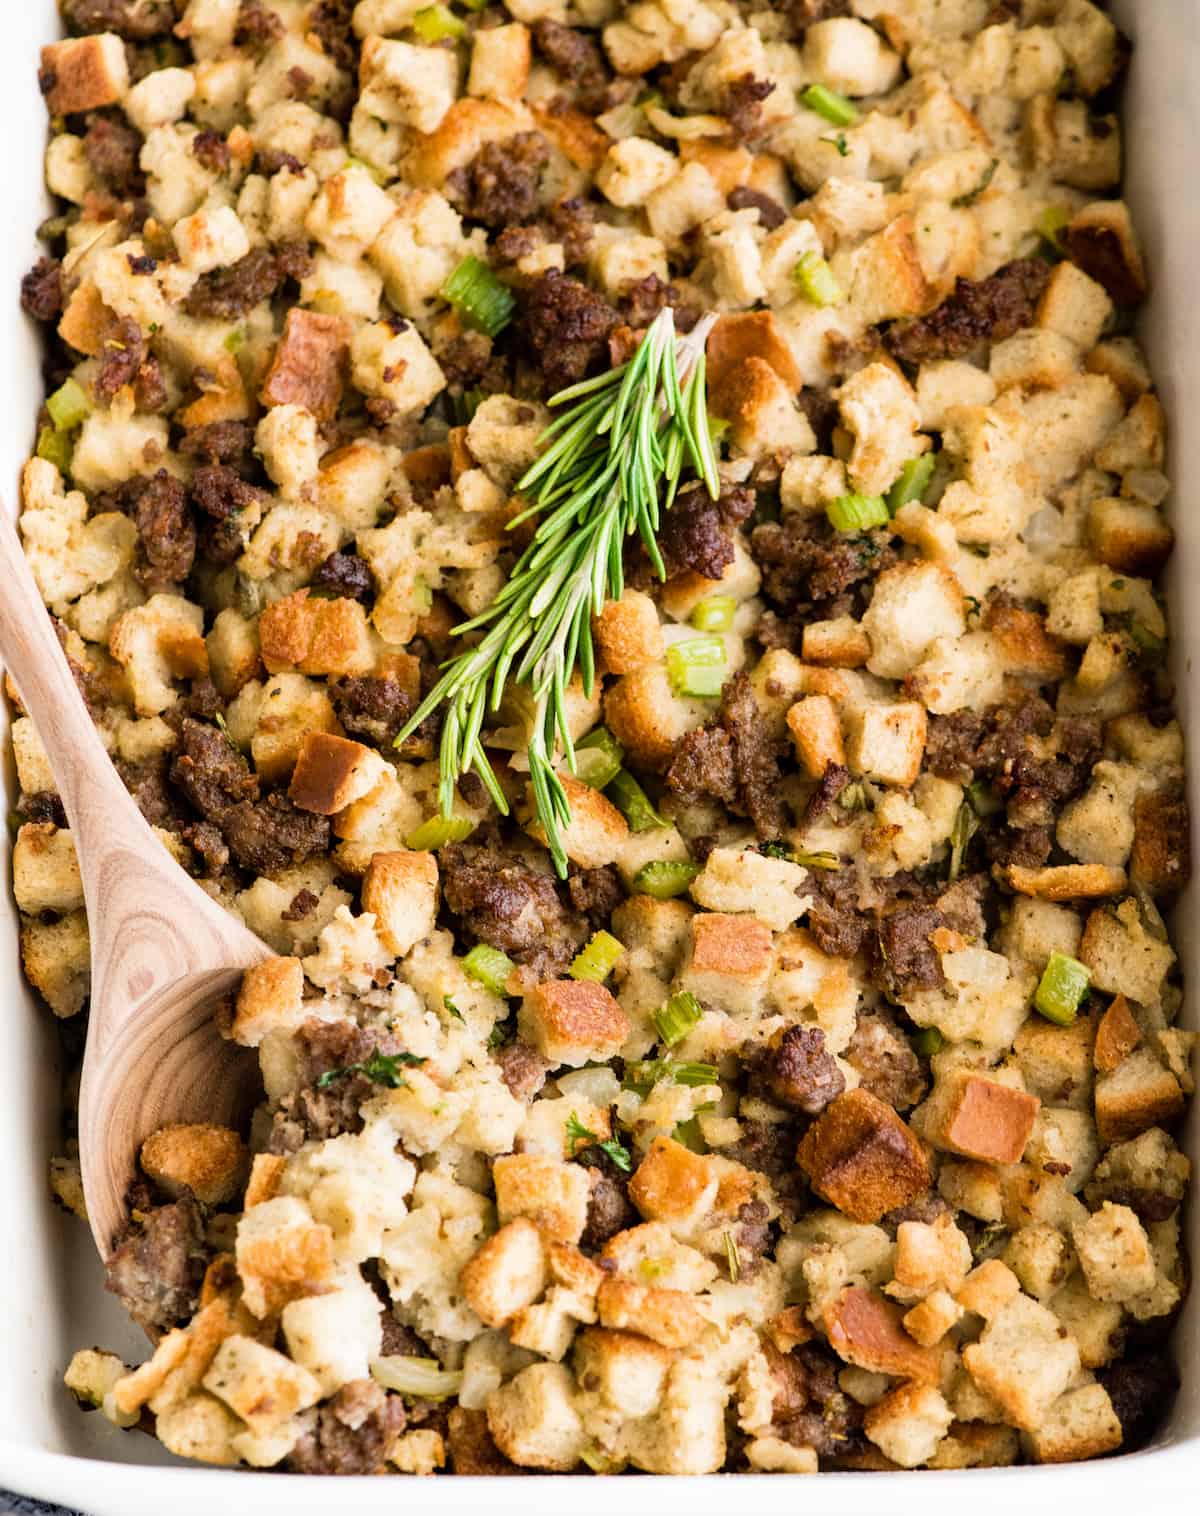 Overhead view of a baking dish of sausage stuffing with fresh rosemary on top and a spoon taking a scoop